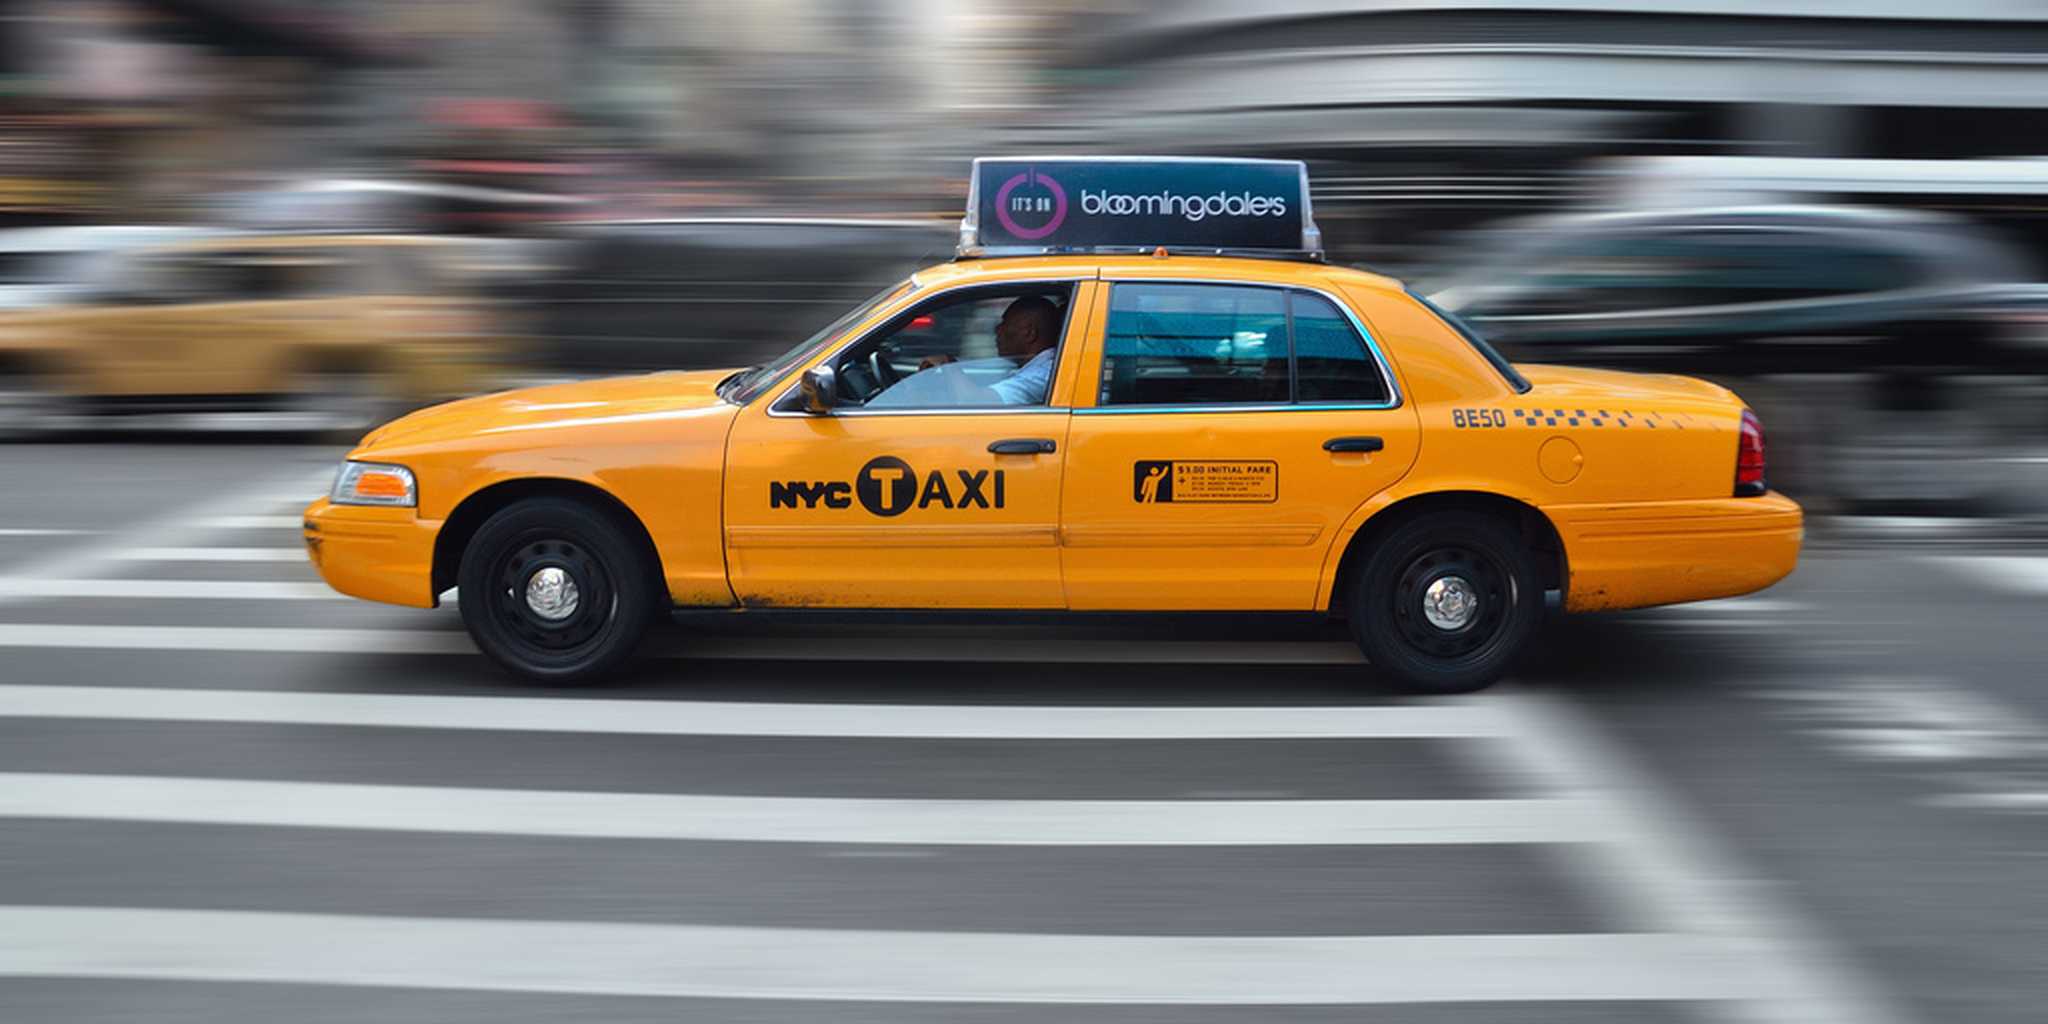 Visualizing a day in the life of an NYC taxi